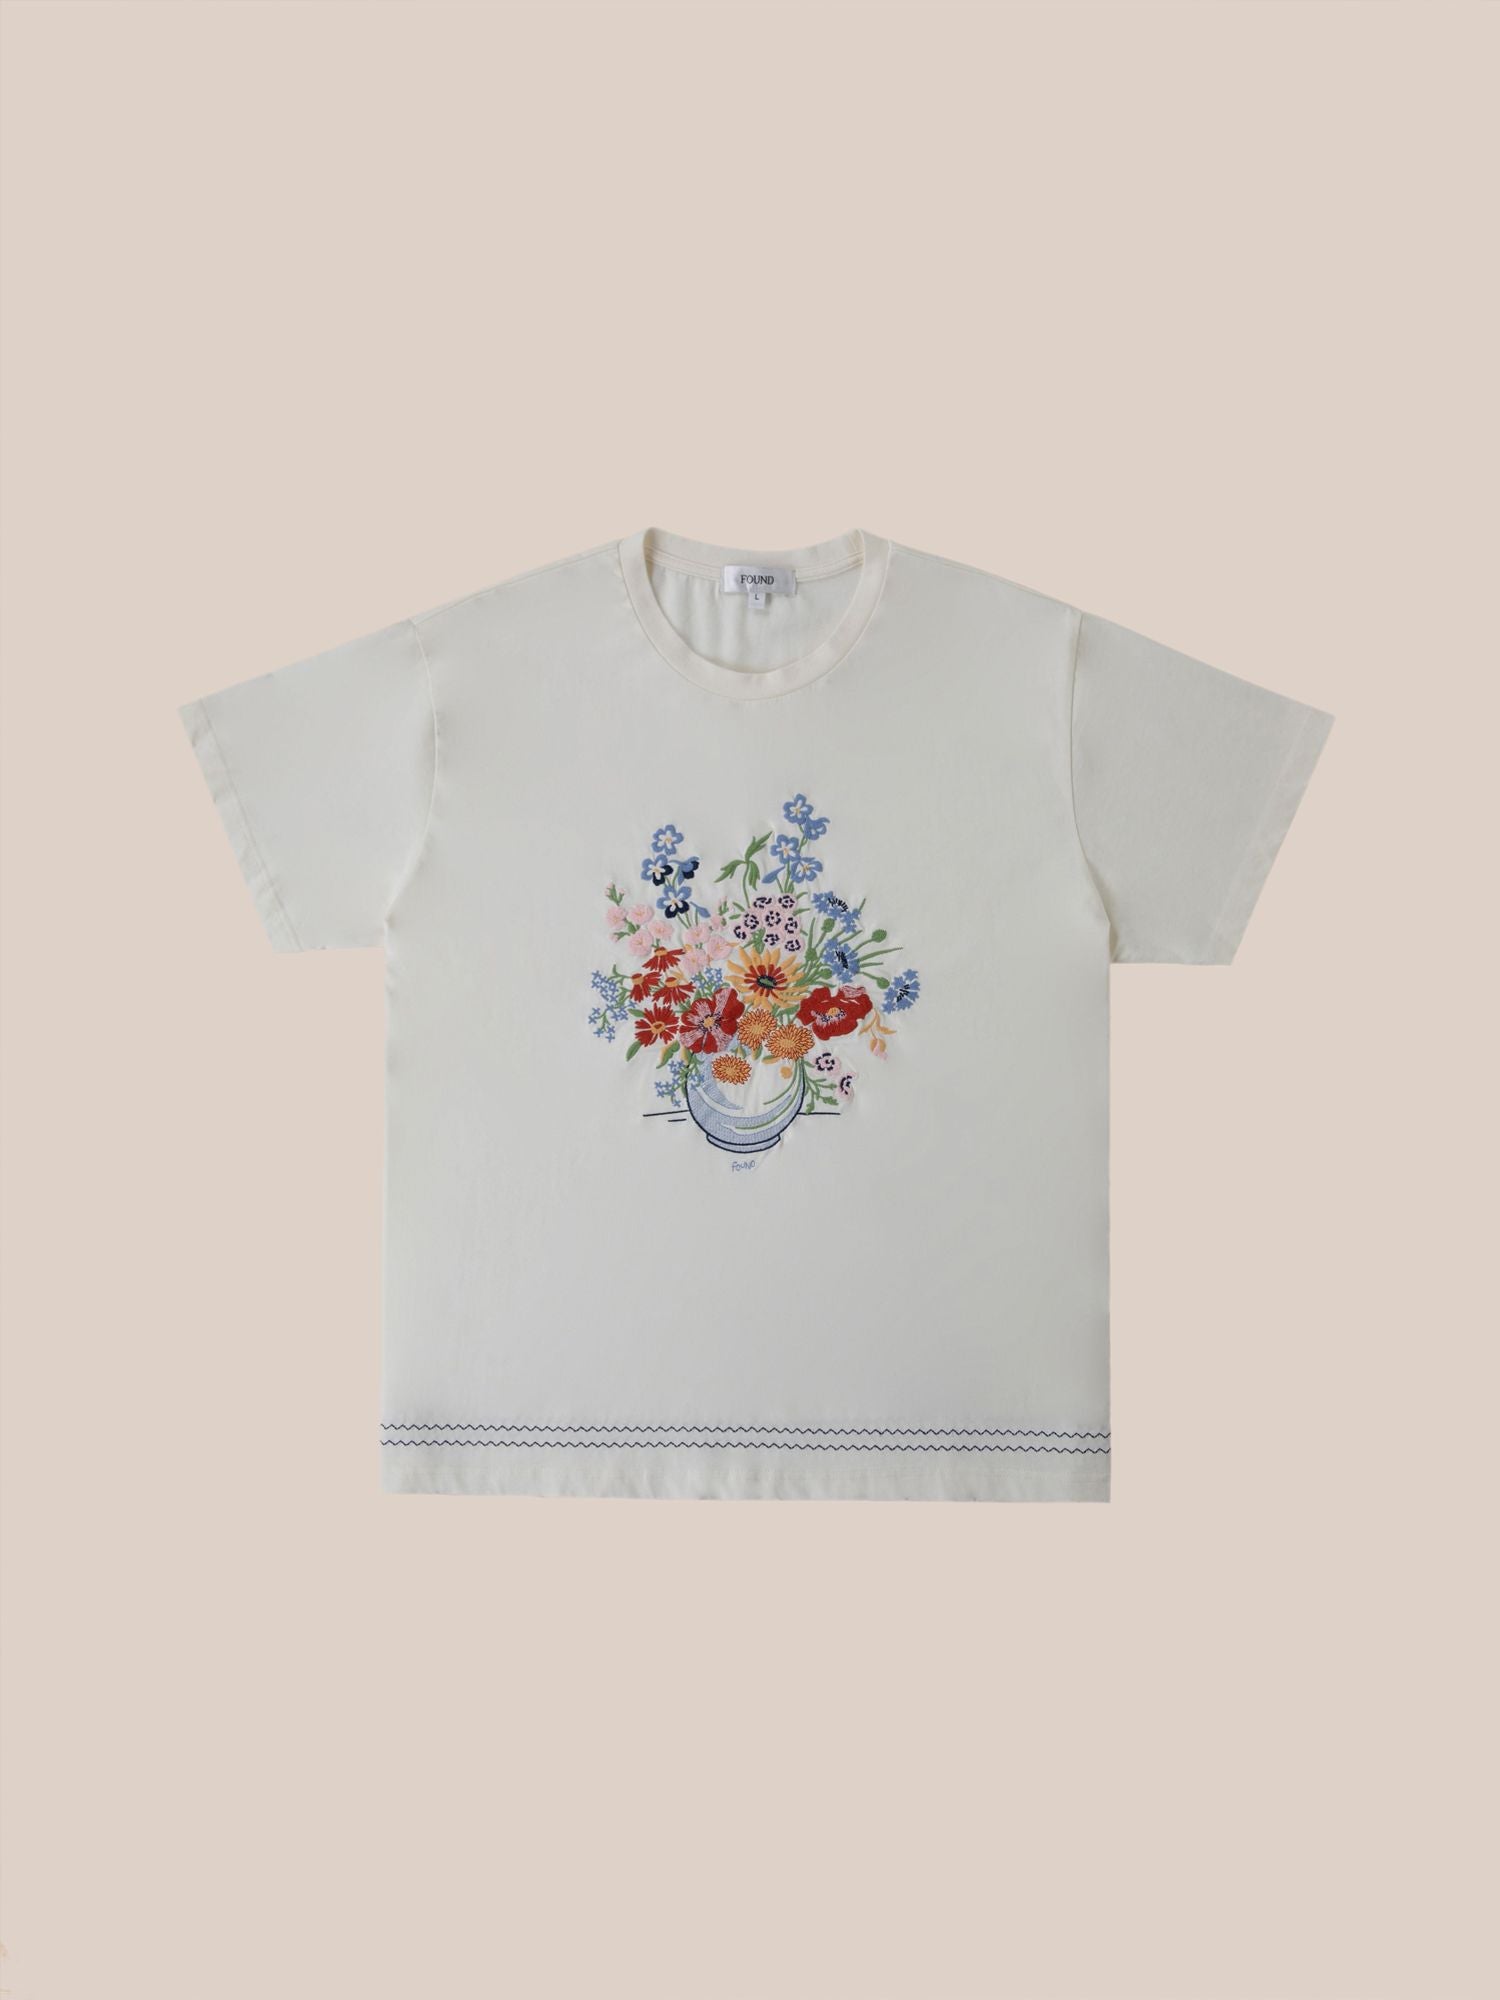 White Bouquet Flowers Tee with colorful Phulkari embroidery centered on the chest, displayed against a light pink background by Found.